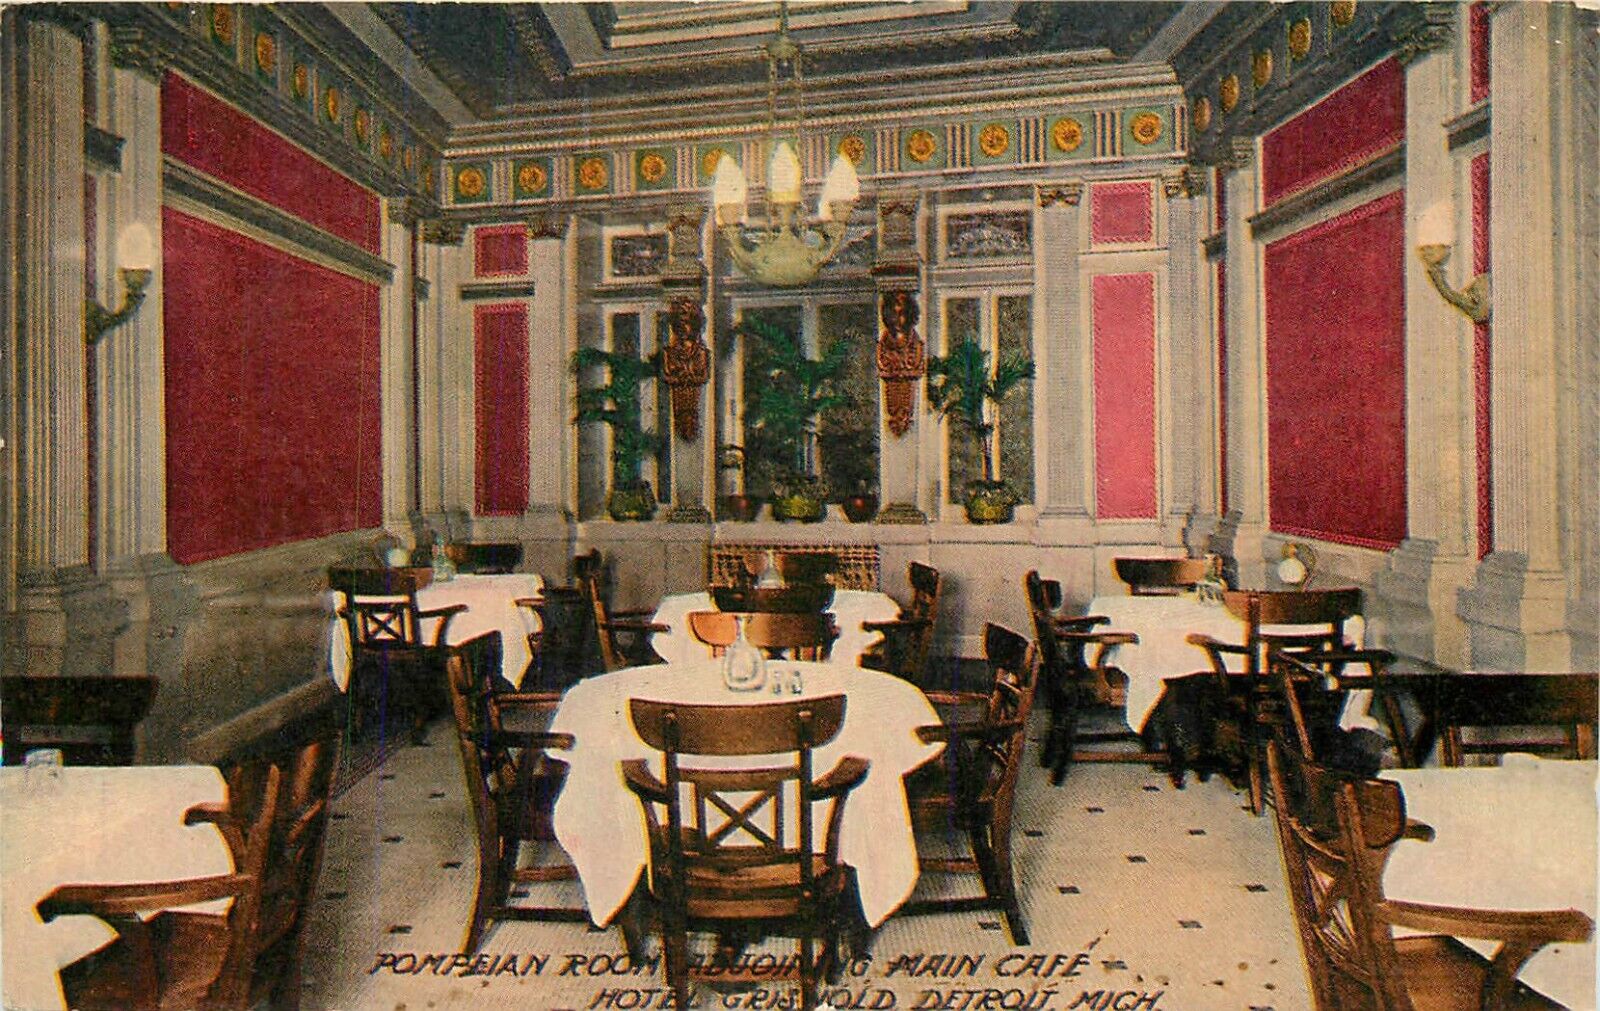 1913 Hotel Griswold Pompeian Room, Interior View, Detroit, Michigan Postcard